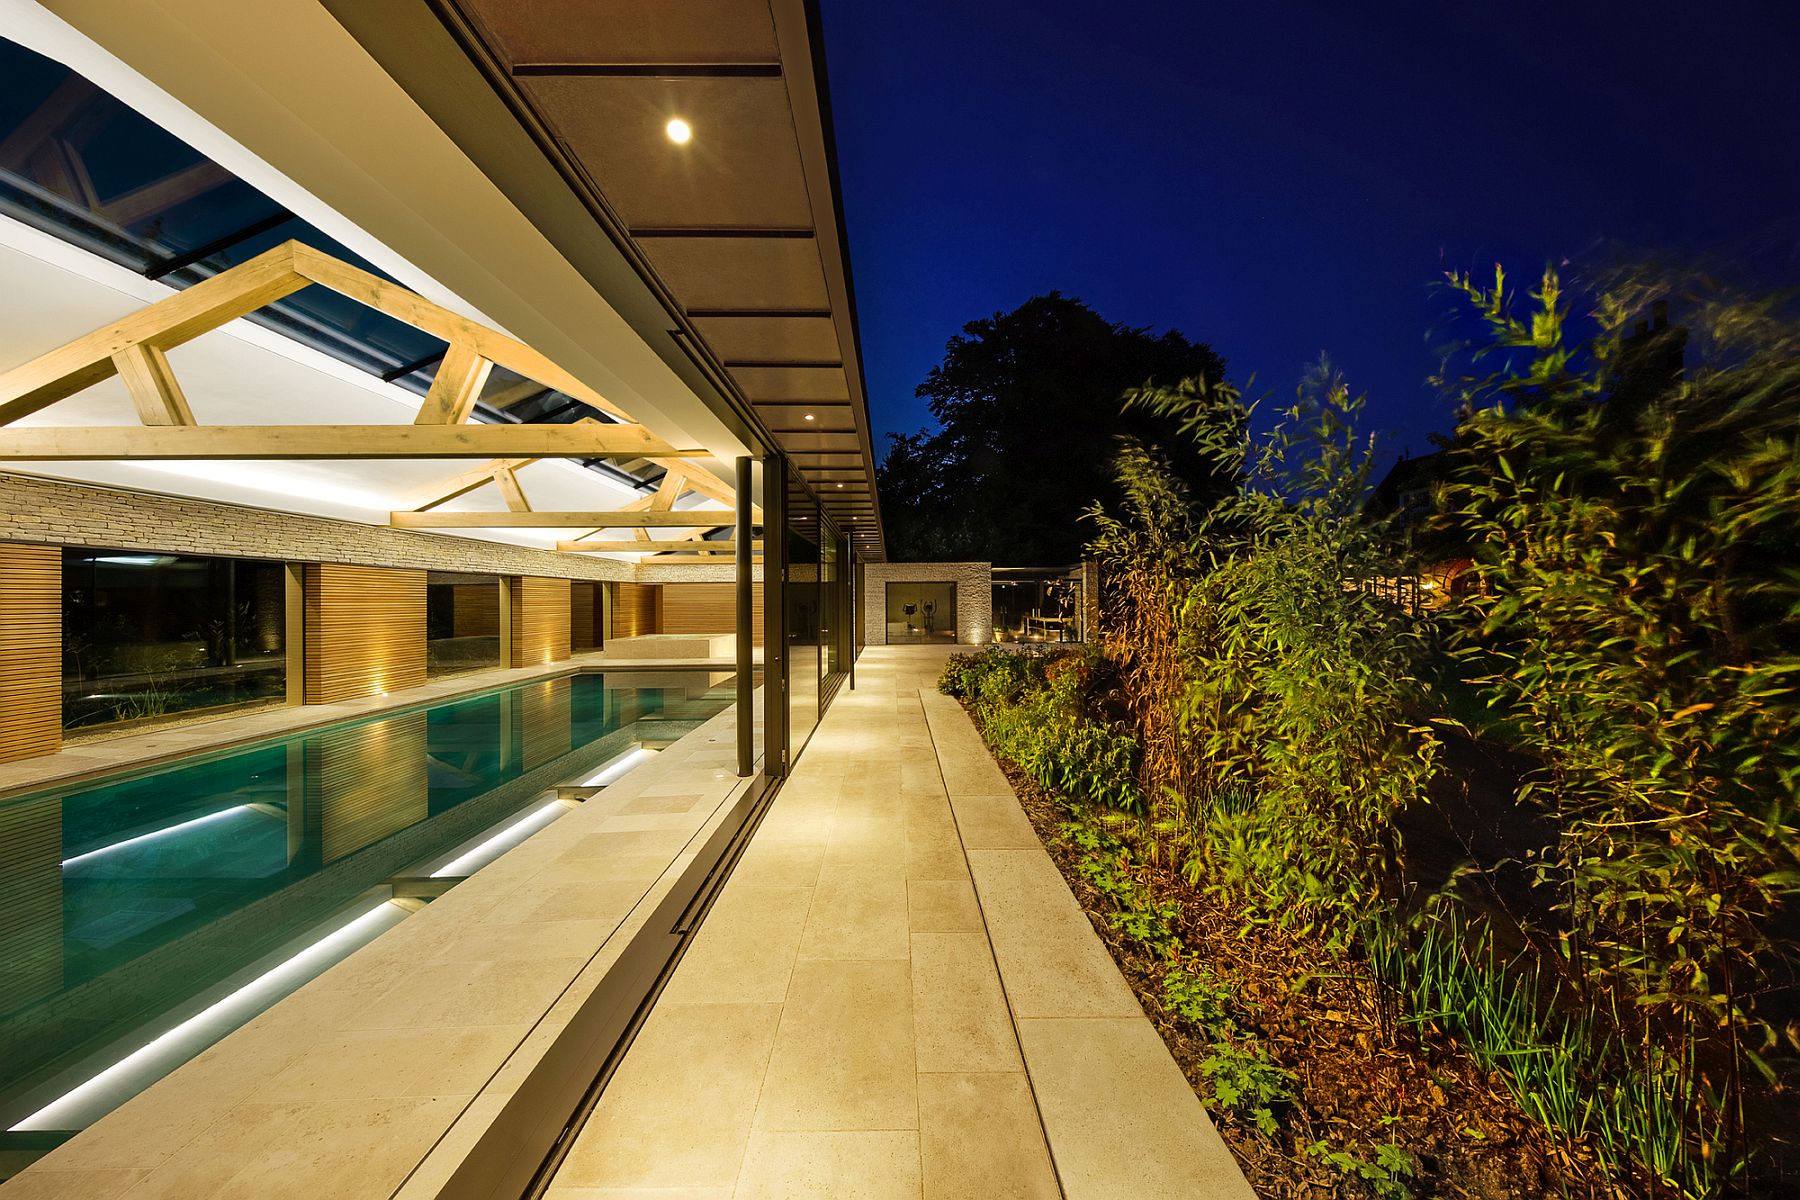 Sliding-glass-doors-connect-the-pool-house-with-the-landscape-and-the-house